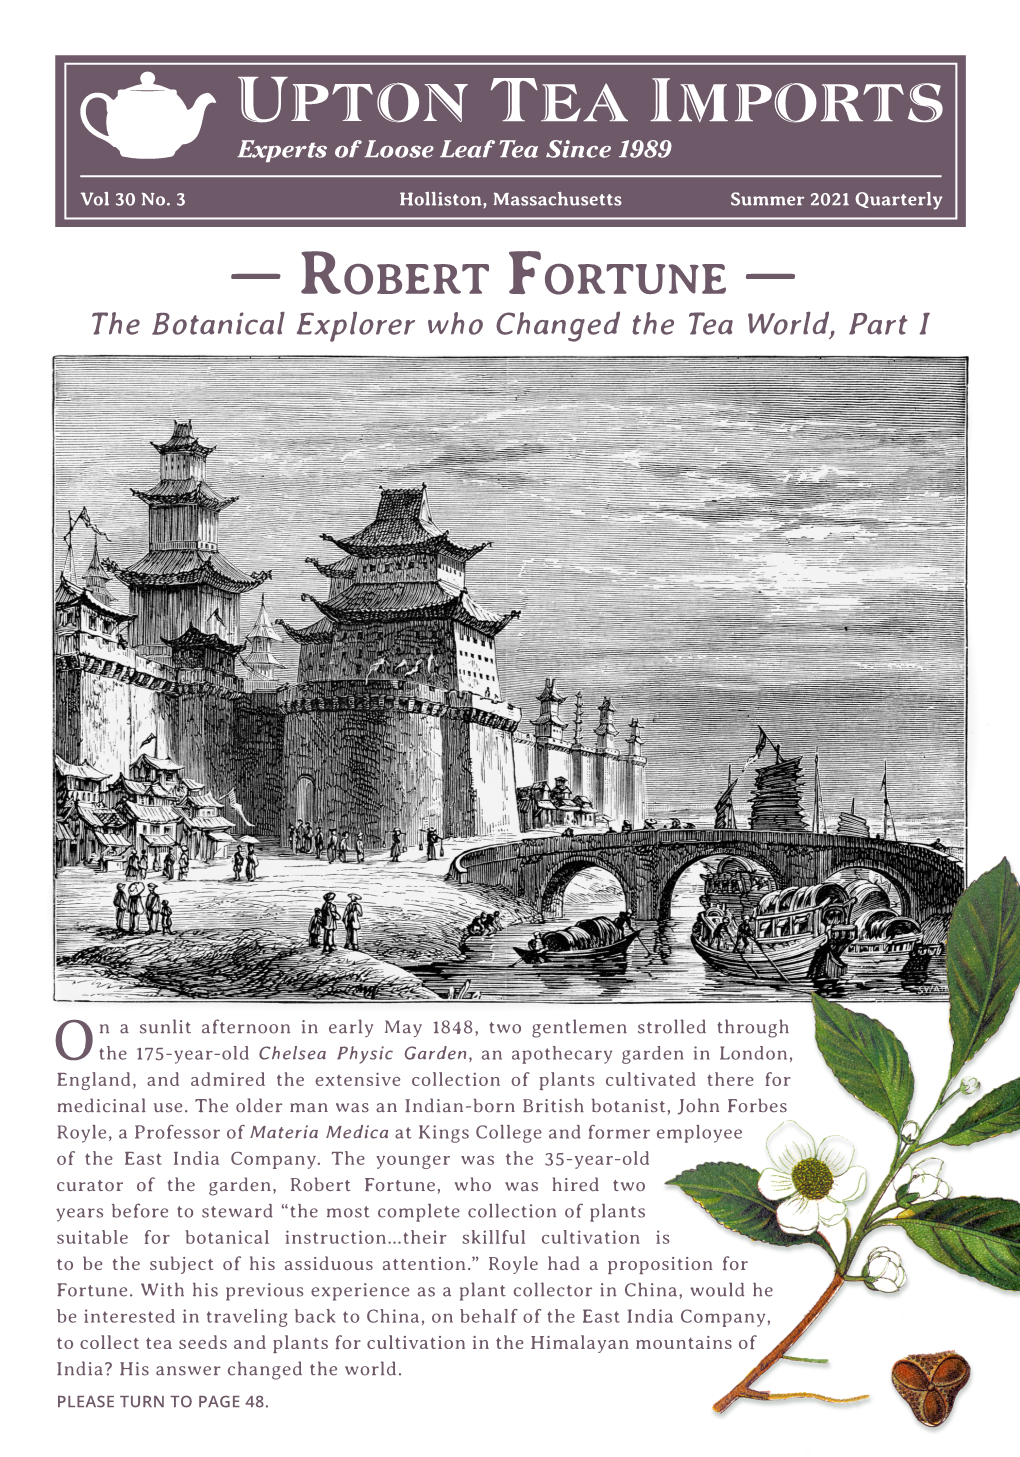 — Robert Fortune — the Botanical Explorer Who Changed the Tea World, Part I